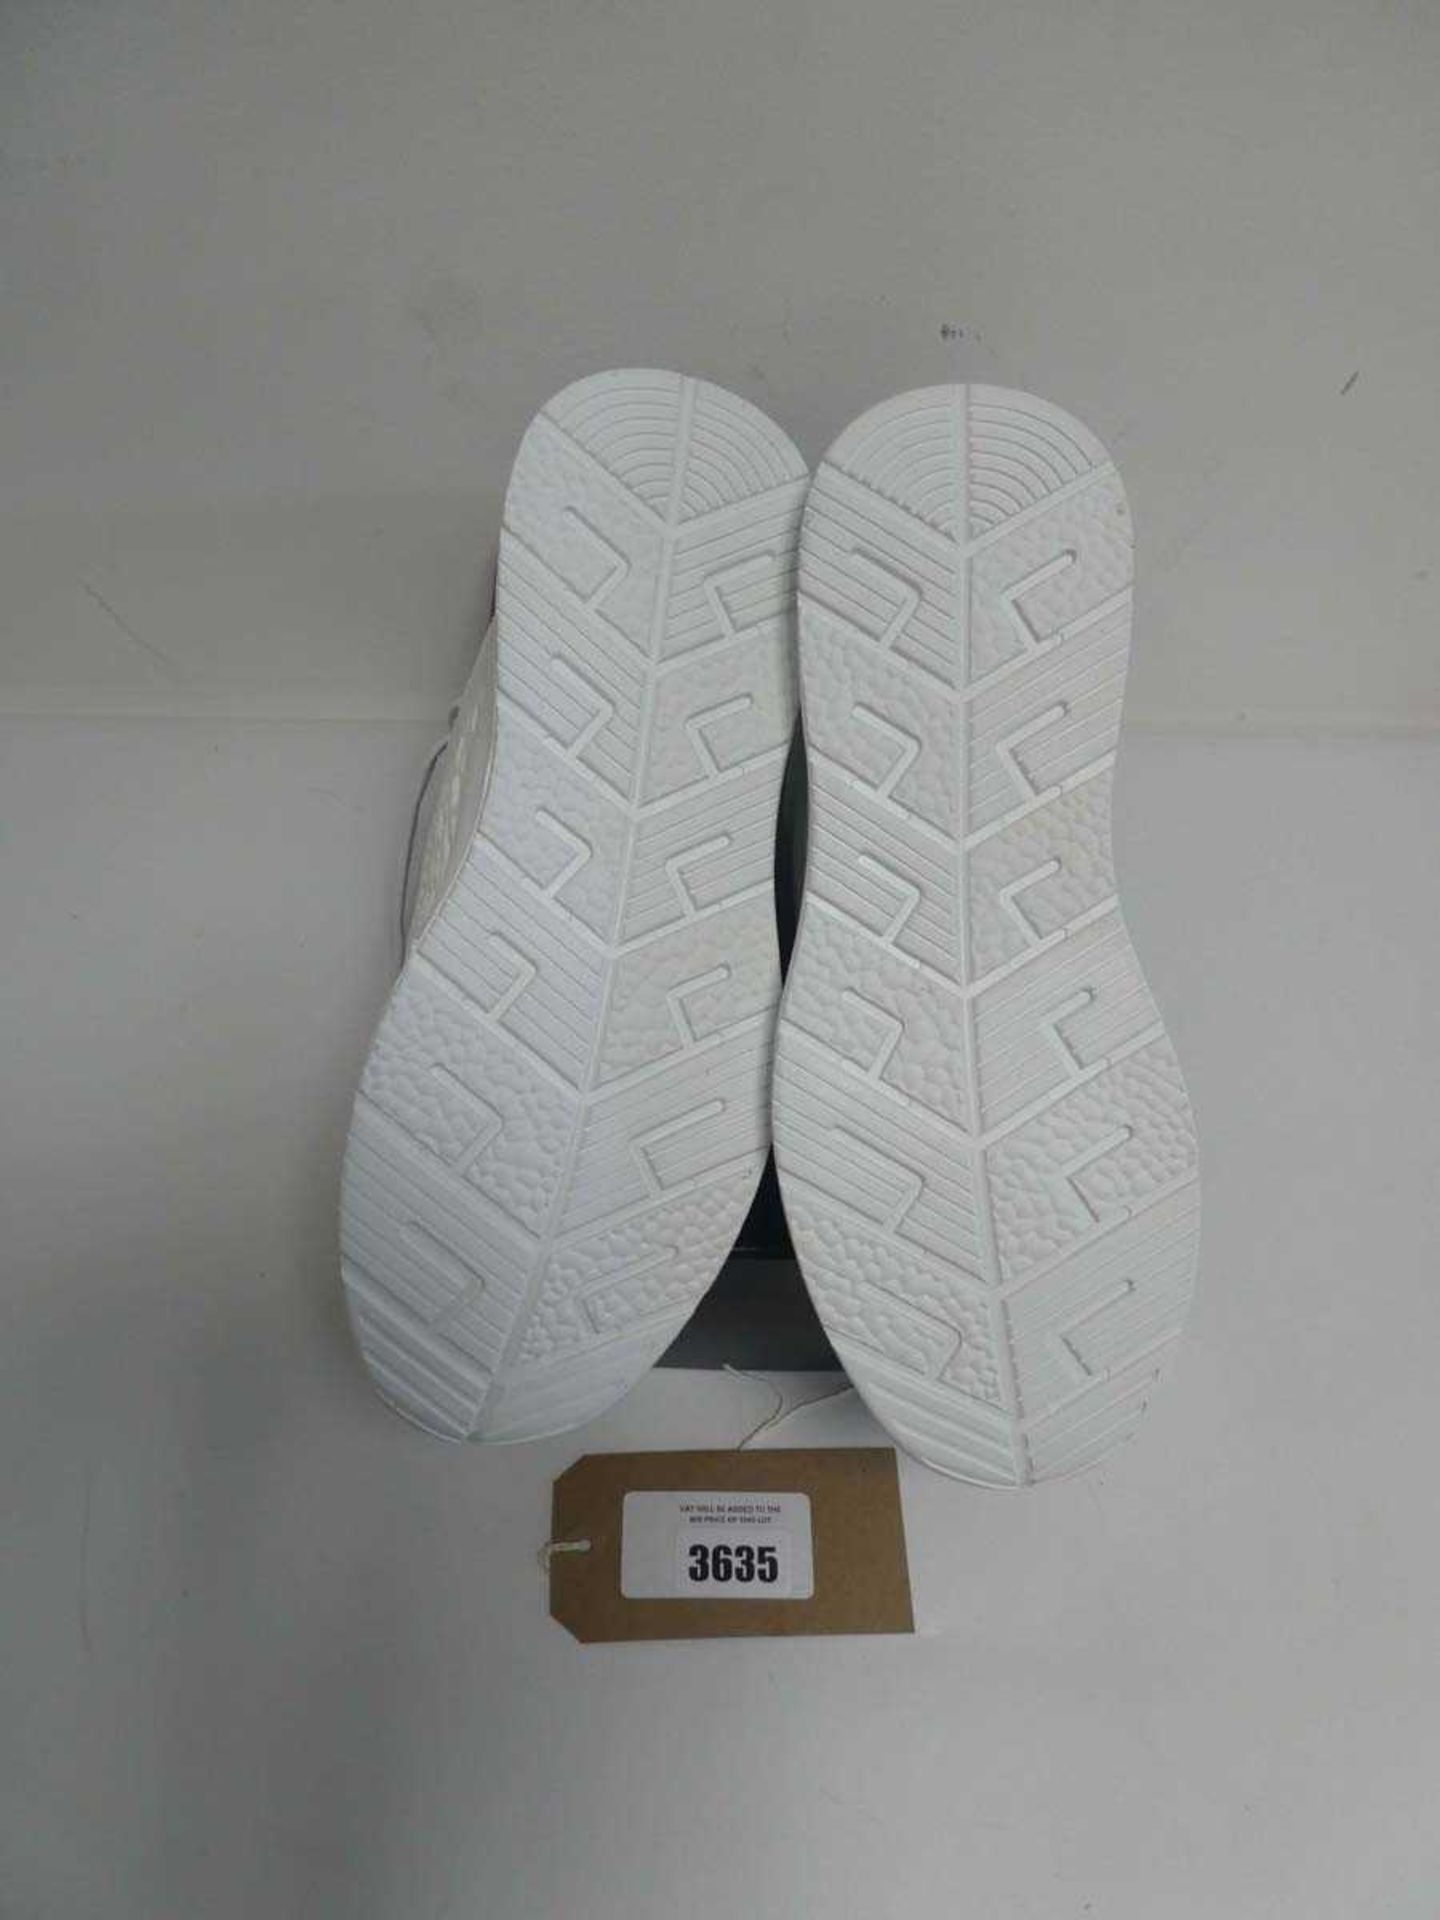 +VAT Conzuri trainers in white size UK8.5 (boxed) - Image 2 of 2